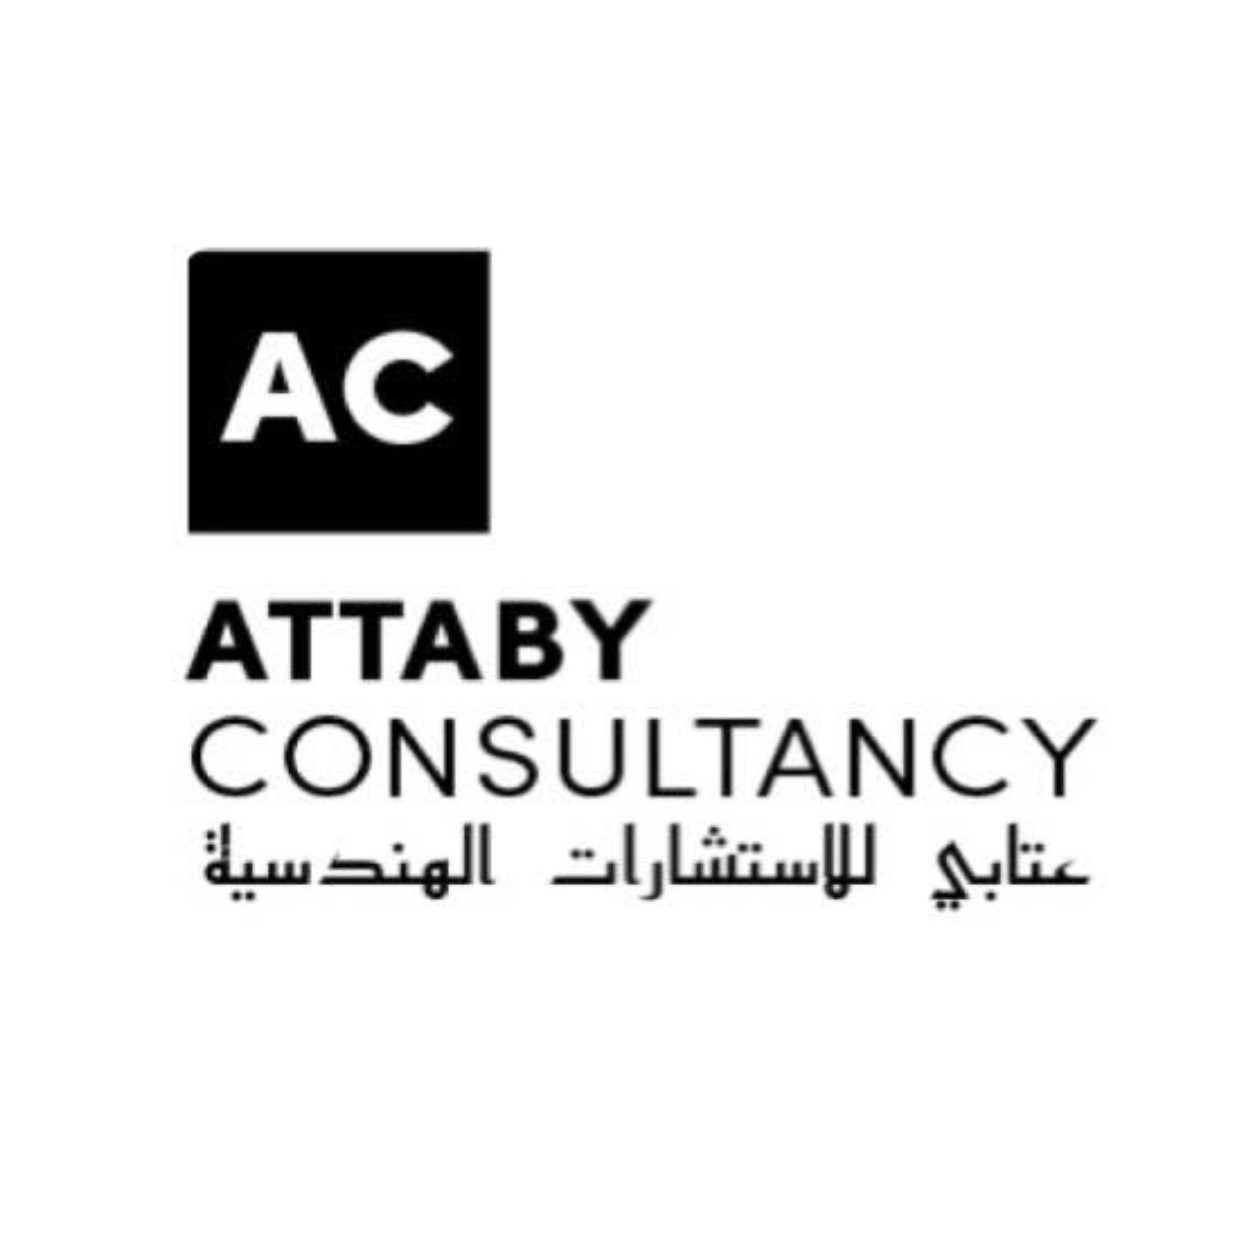 Attaby Consultancy